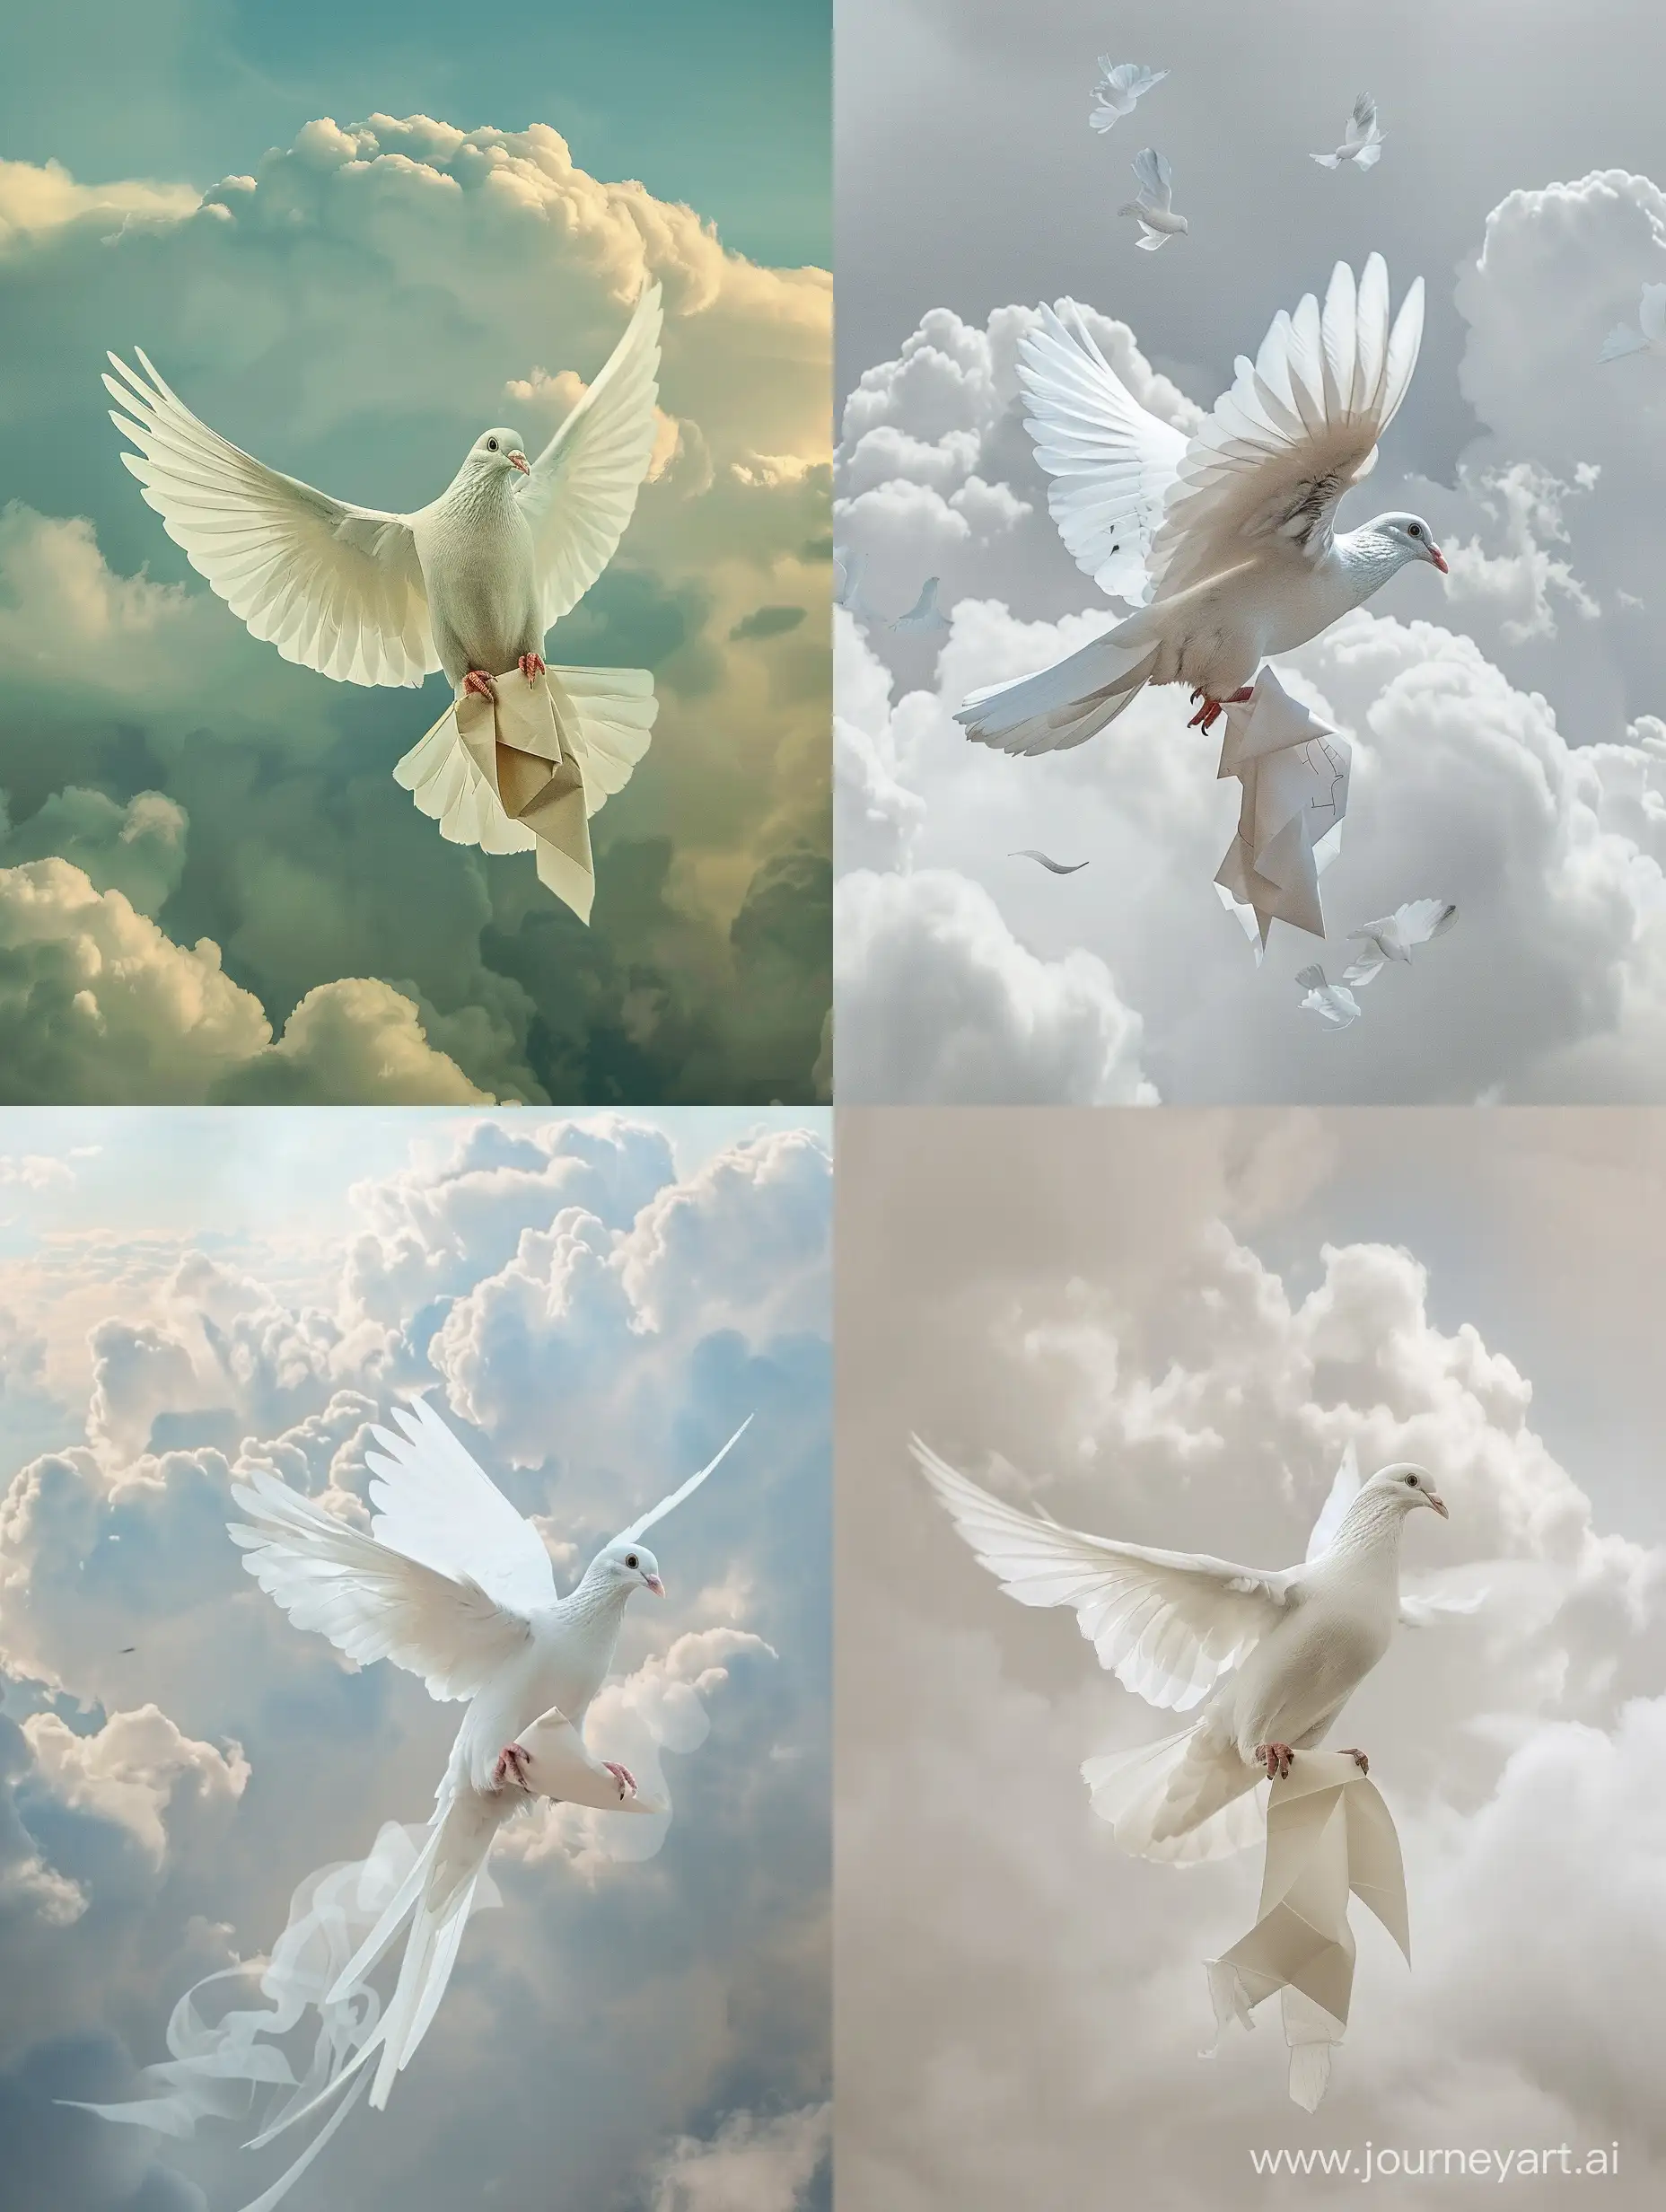 Graceful-White-Dove-Soaring-Amidst-Clouds-with-a-Precious-Message